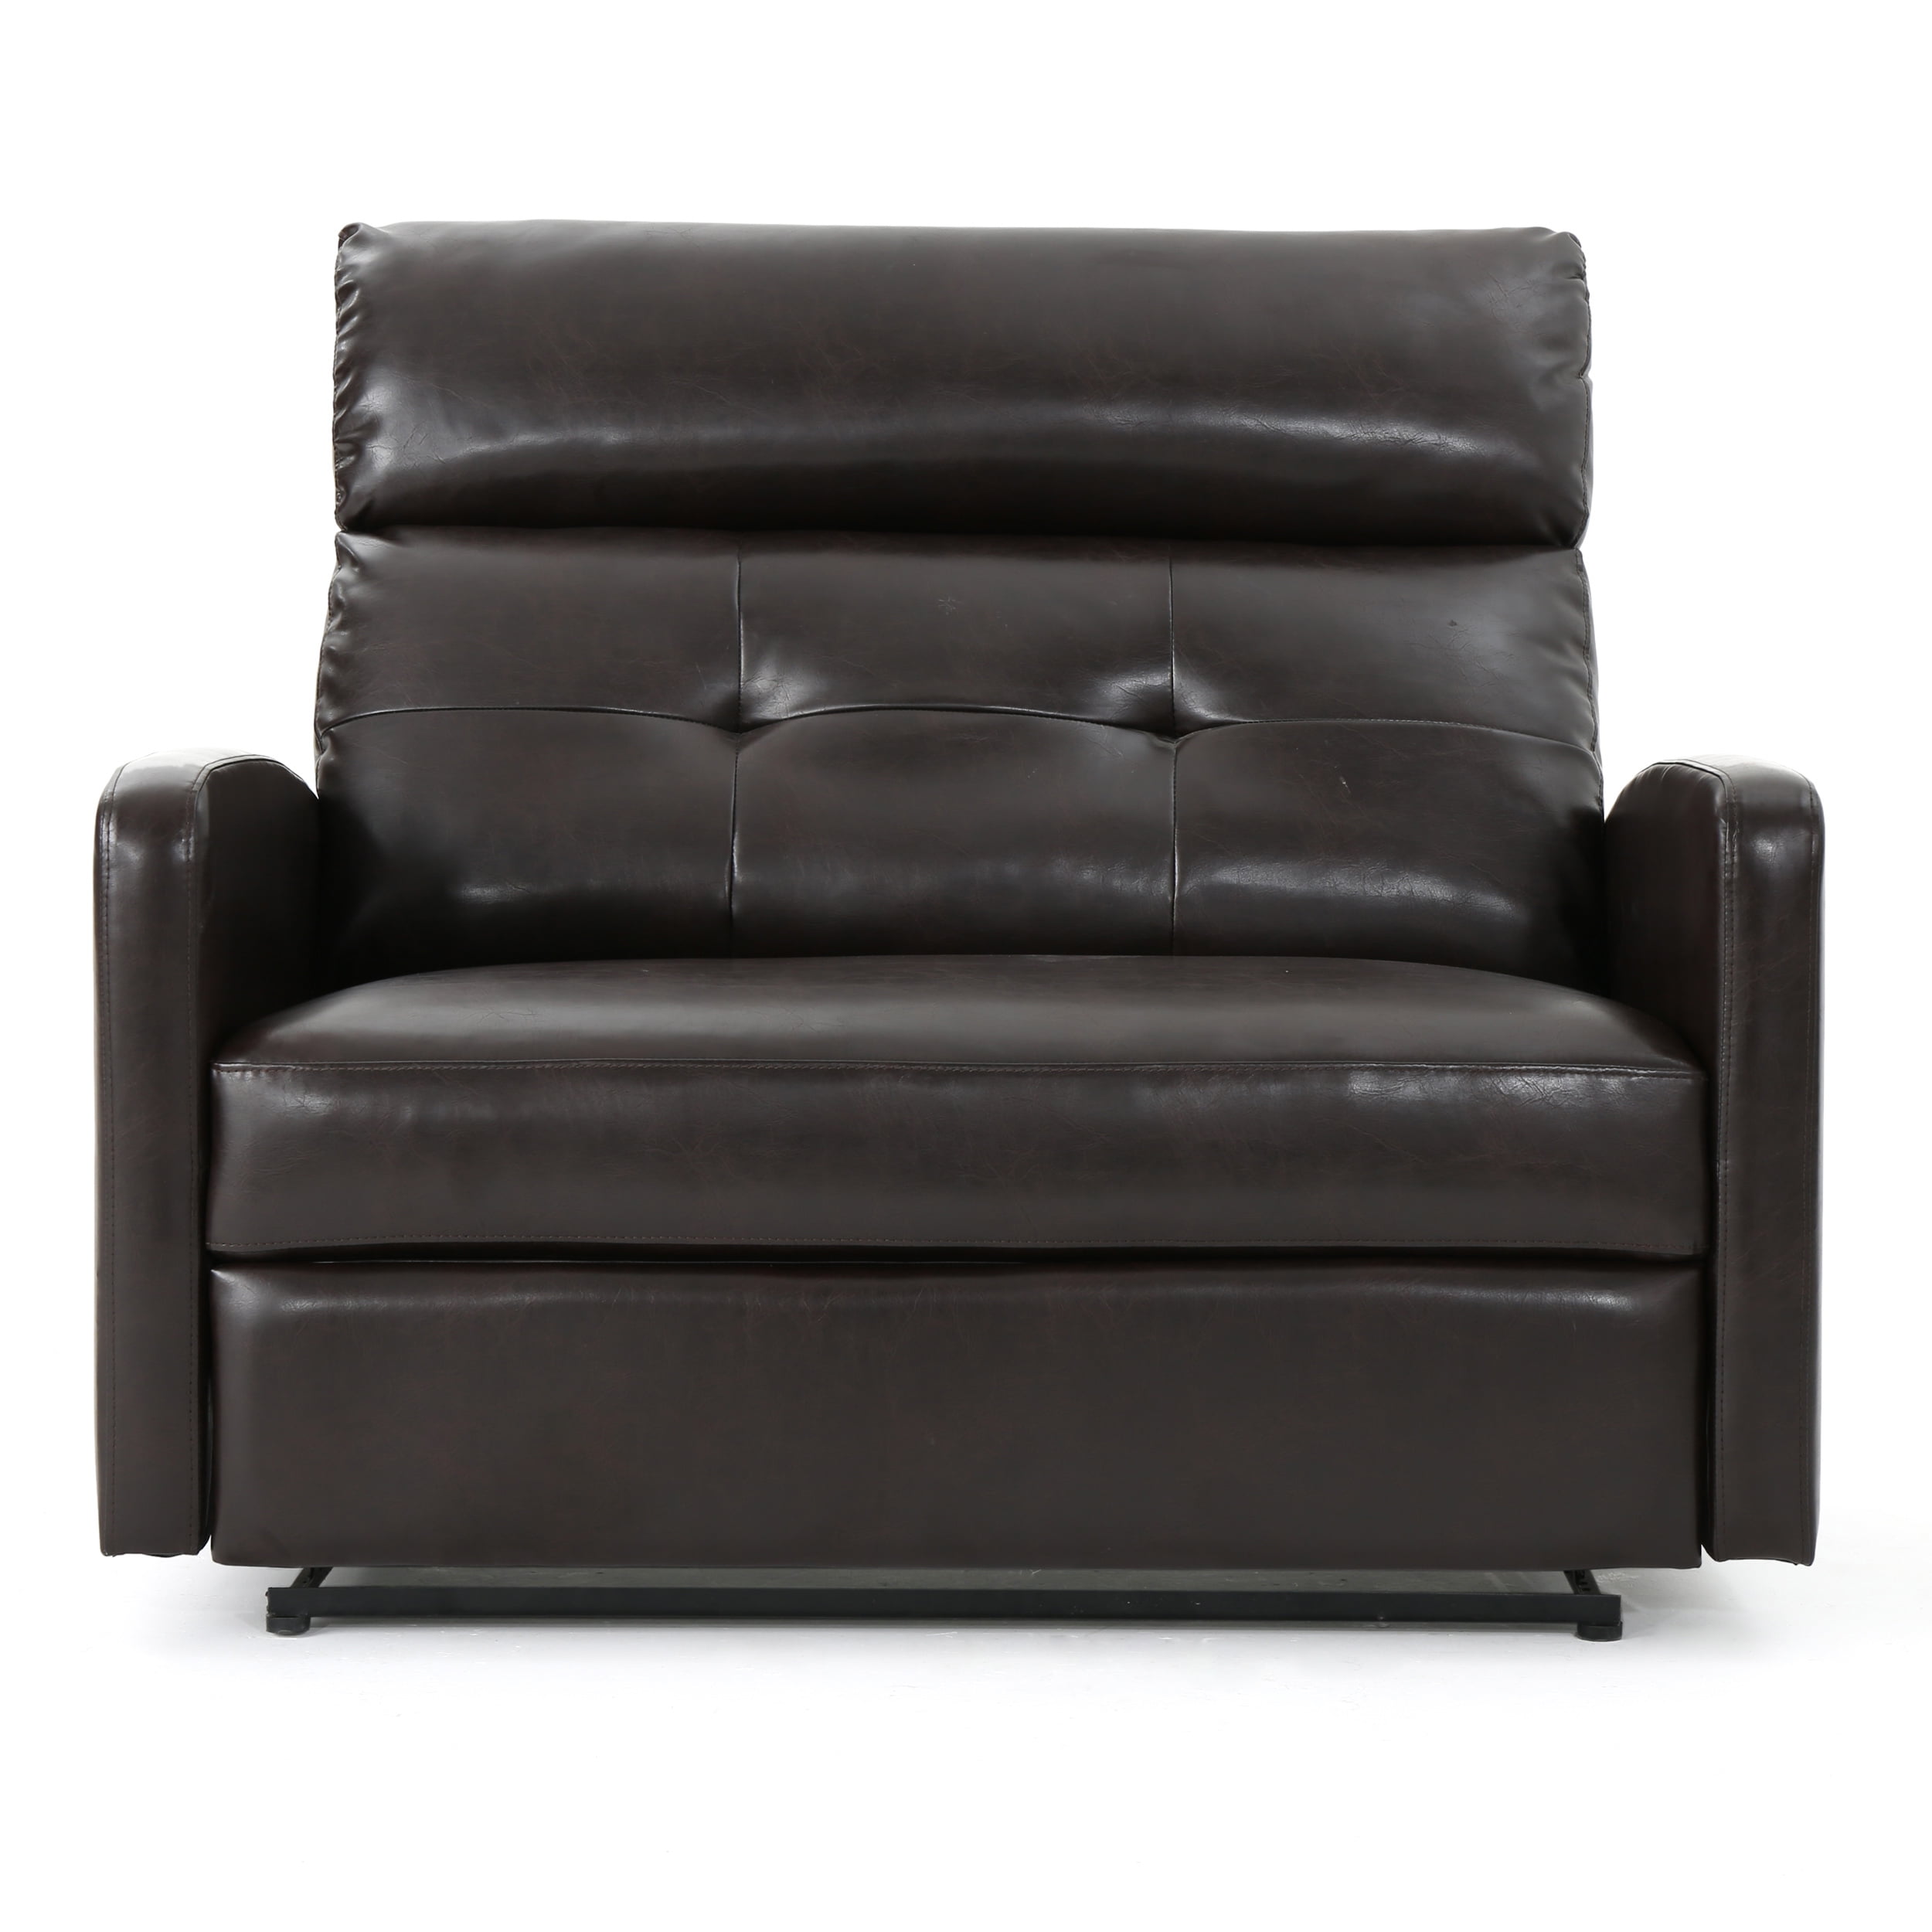 Hana Leather 2 Seater Recliner Brown, Oversized Leather Recliner For Two